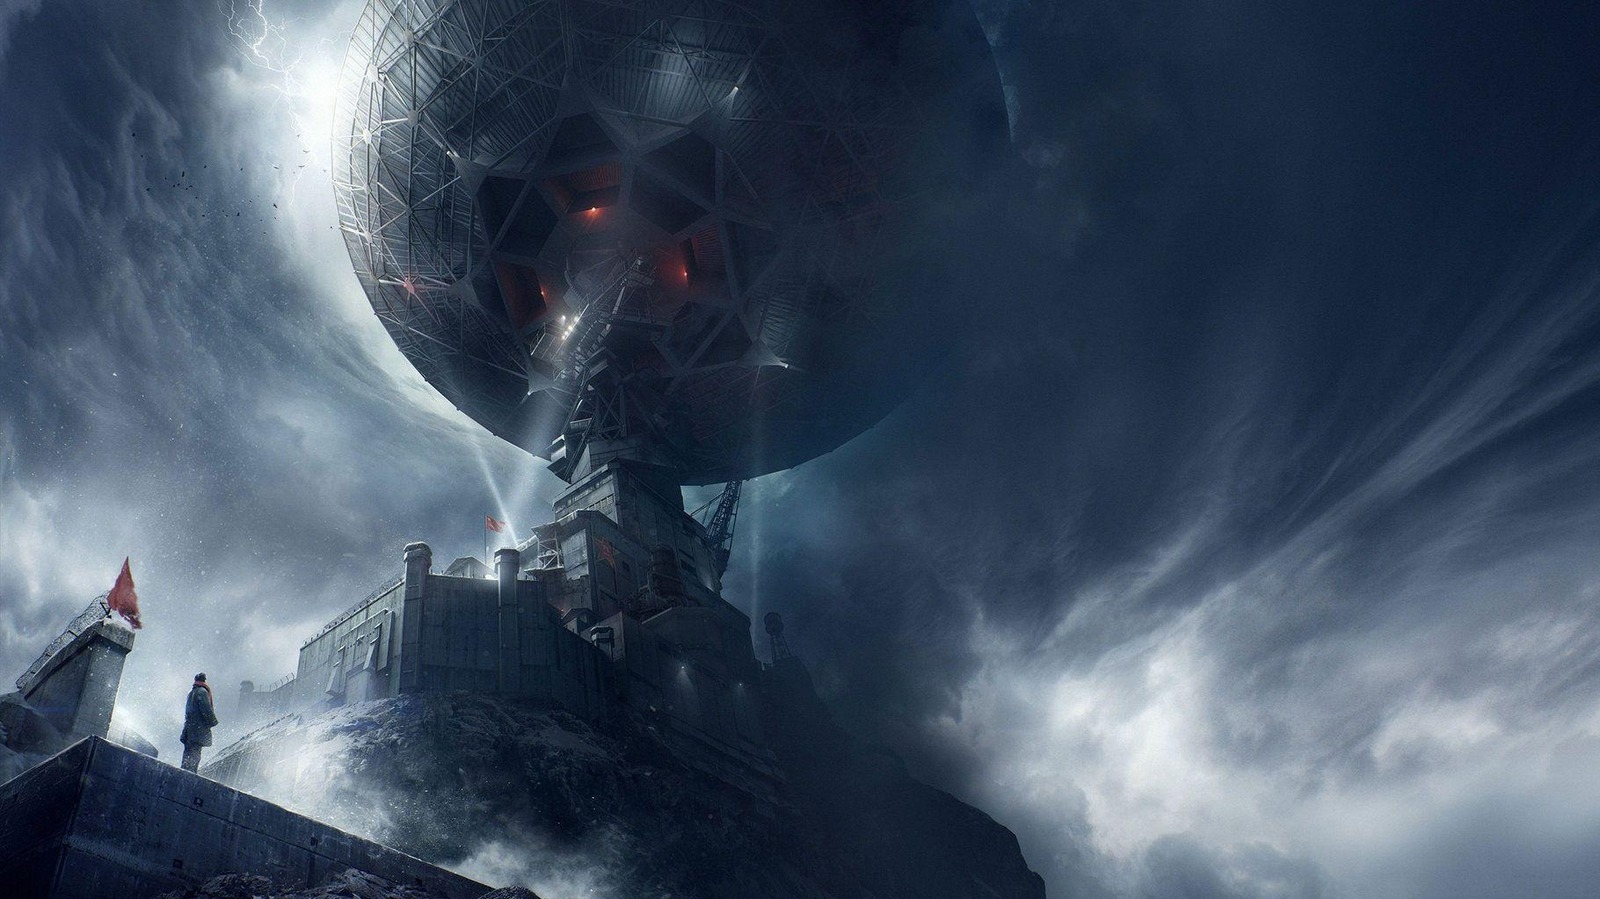 3 Body Problem' Netflix Series: Everything We Know So Far - What's